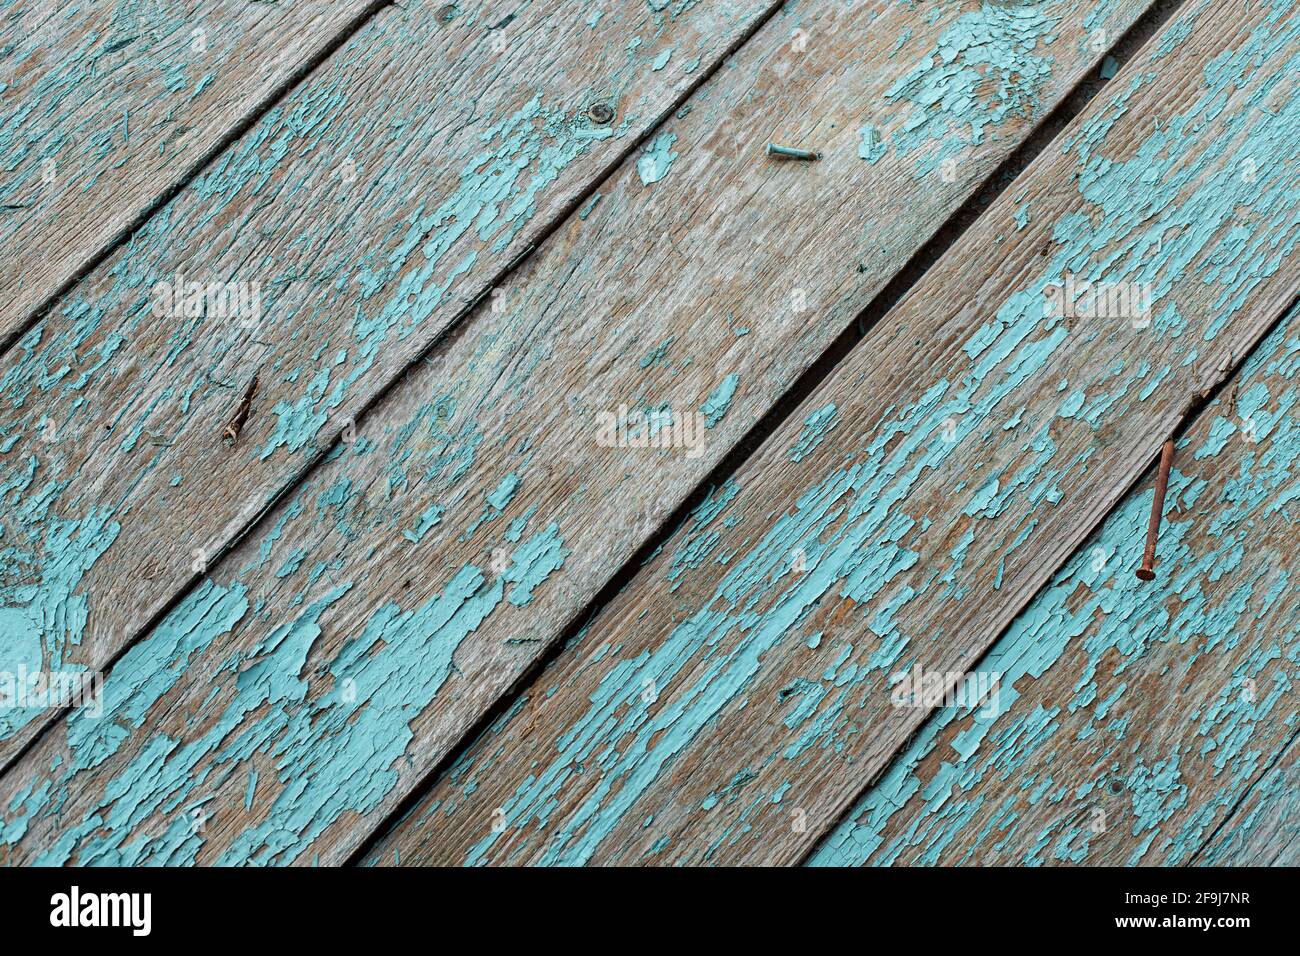 Old turquoise wooden board with rusty hobnails. vintage background Stock Photo